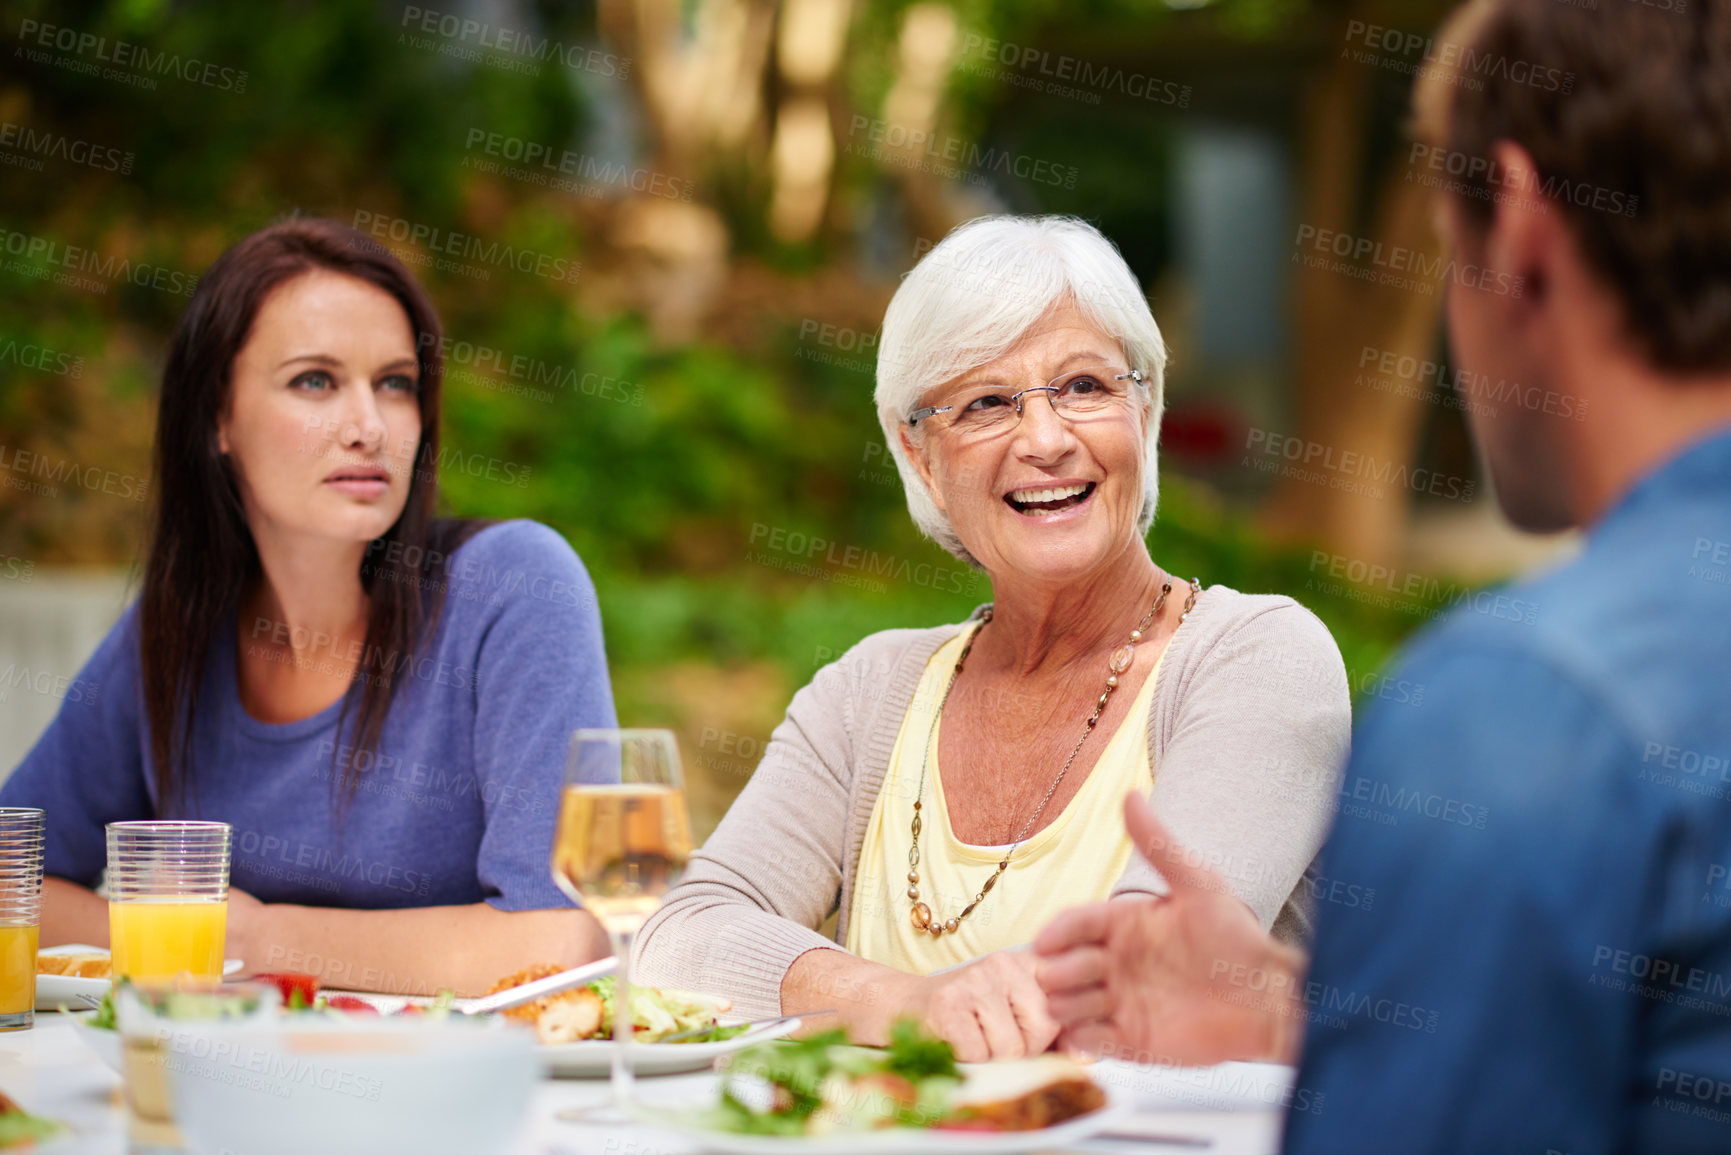 Buy stock photo Shot of a mother having lunch outside with her adult son and daughter